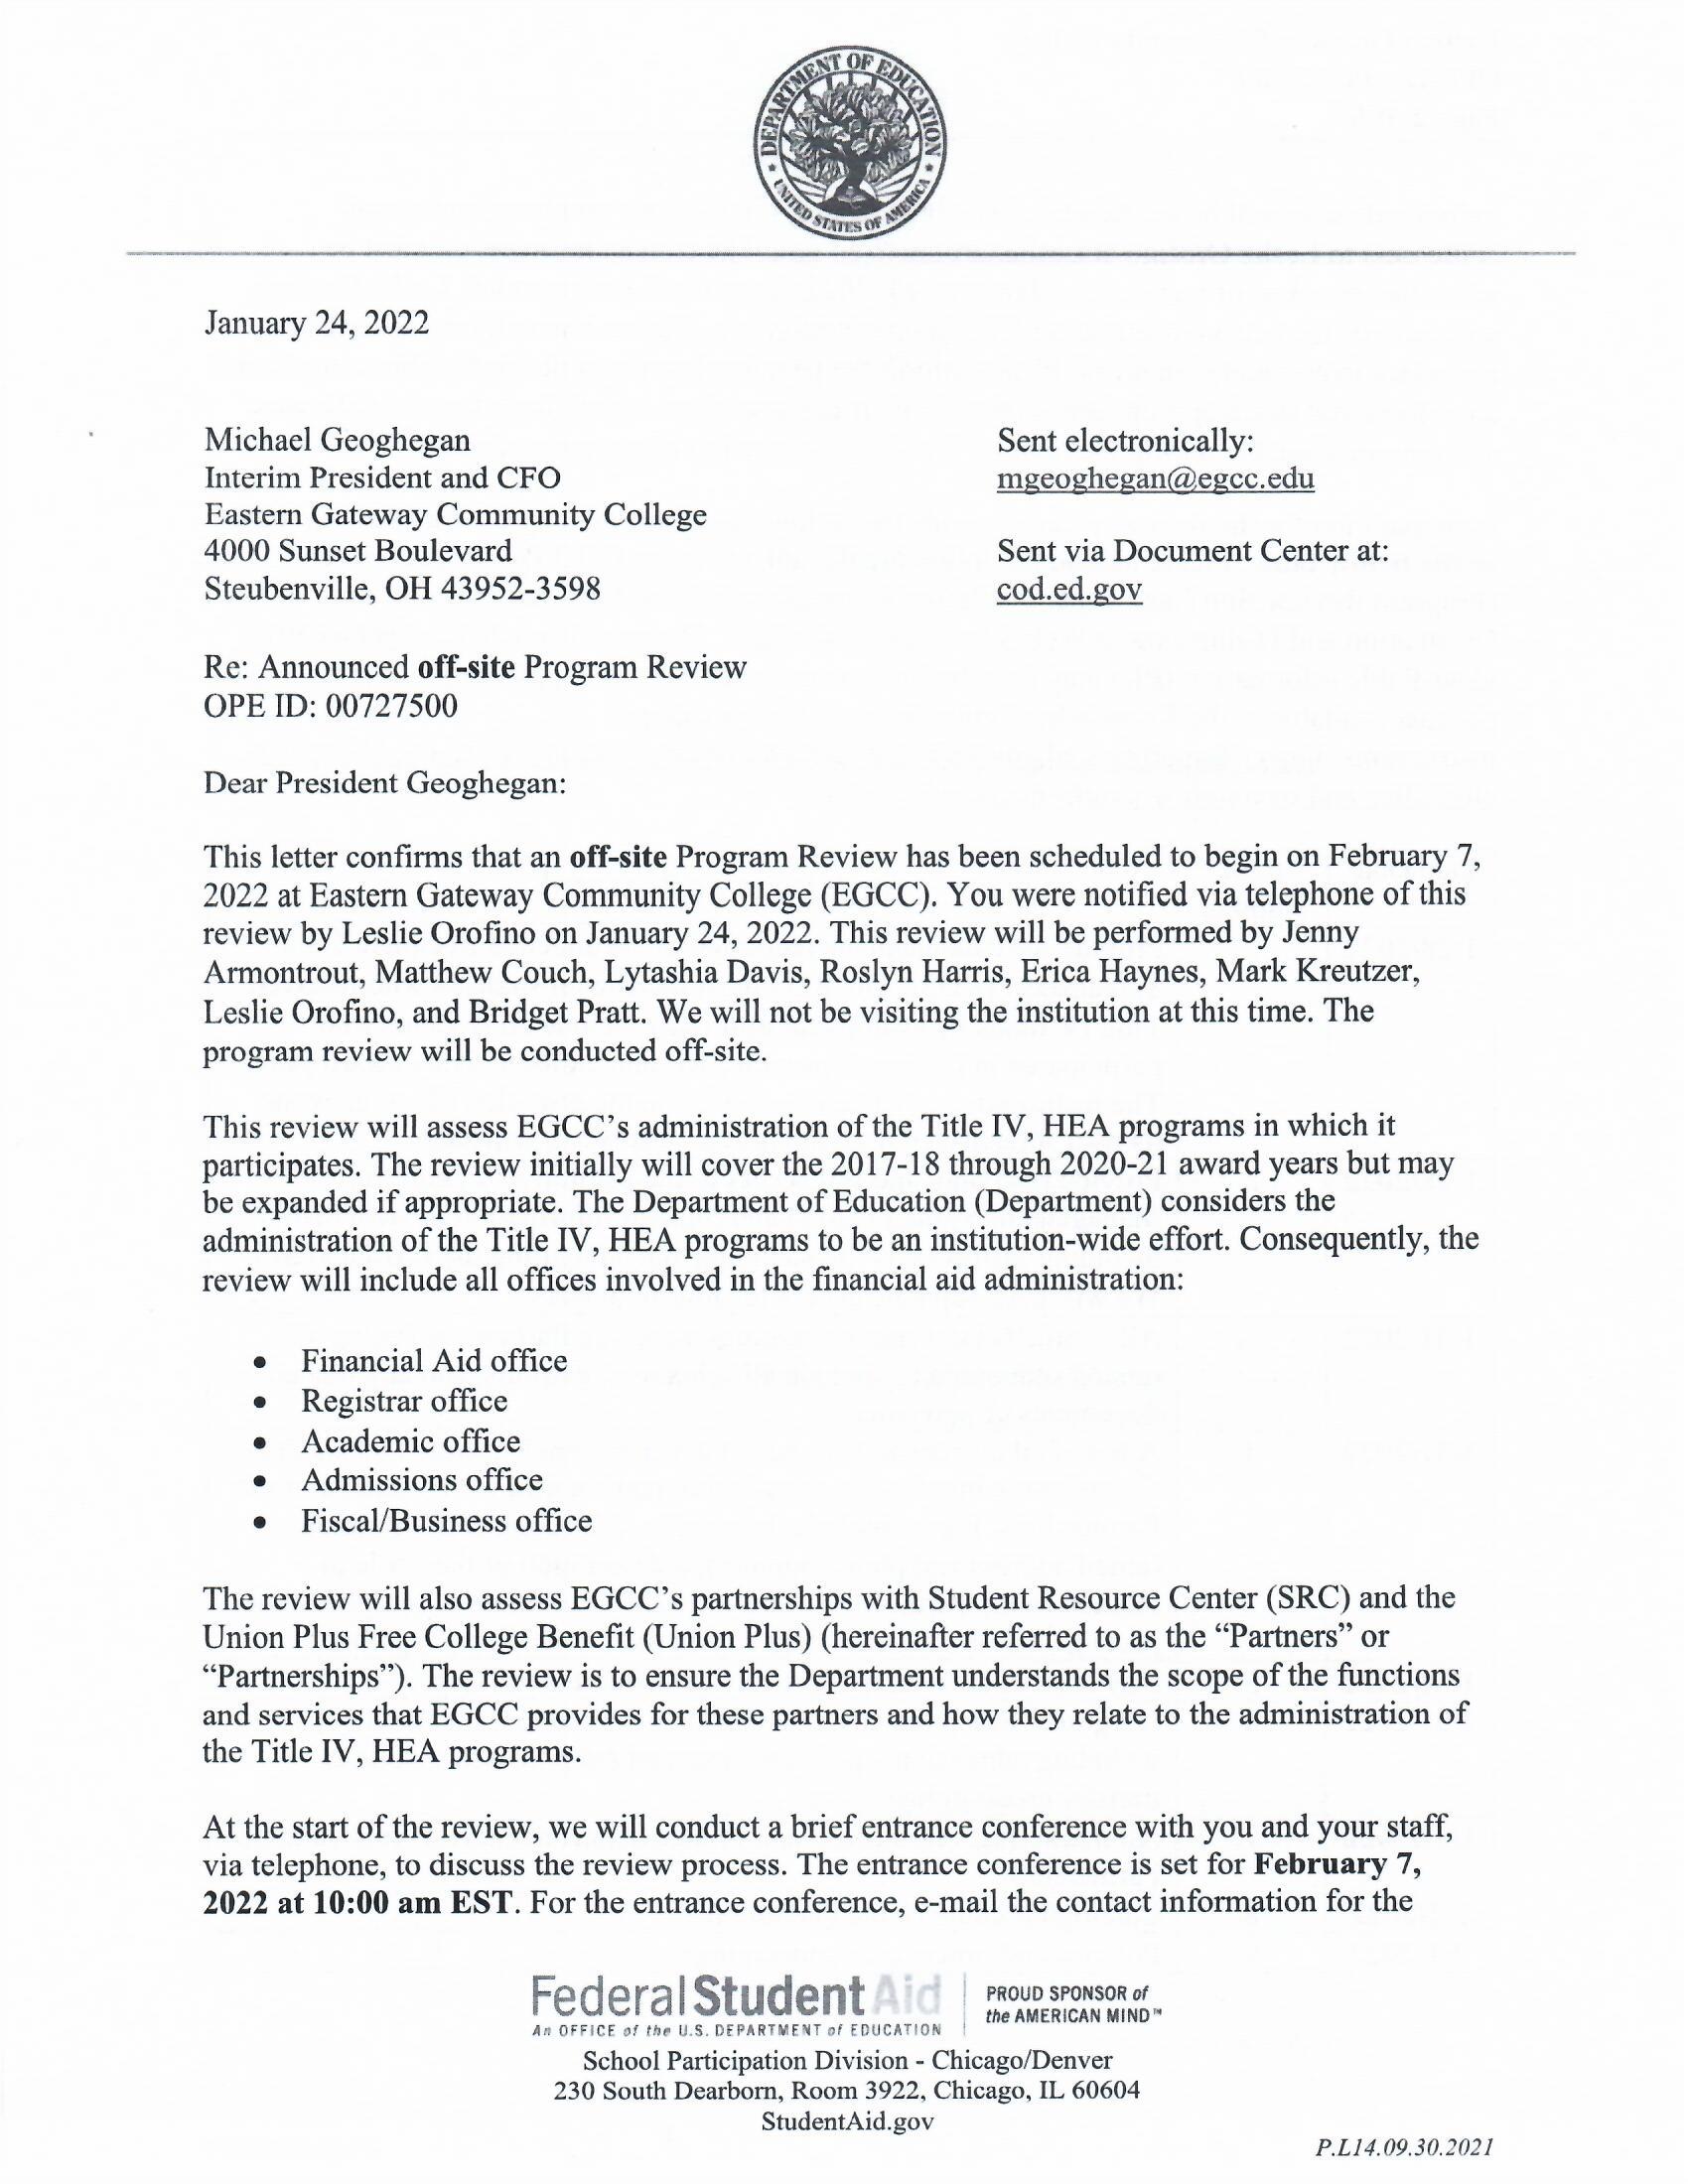 Letter from the U.S. Department of Education to Eastern Gateway Community College announcing program review.